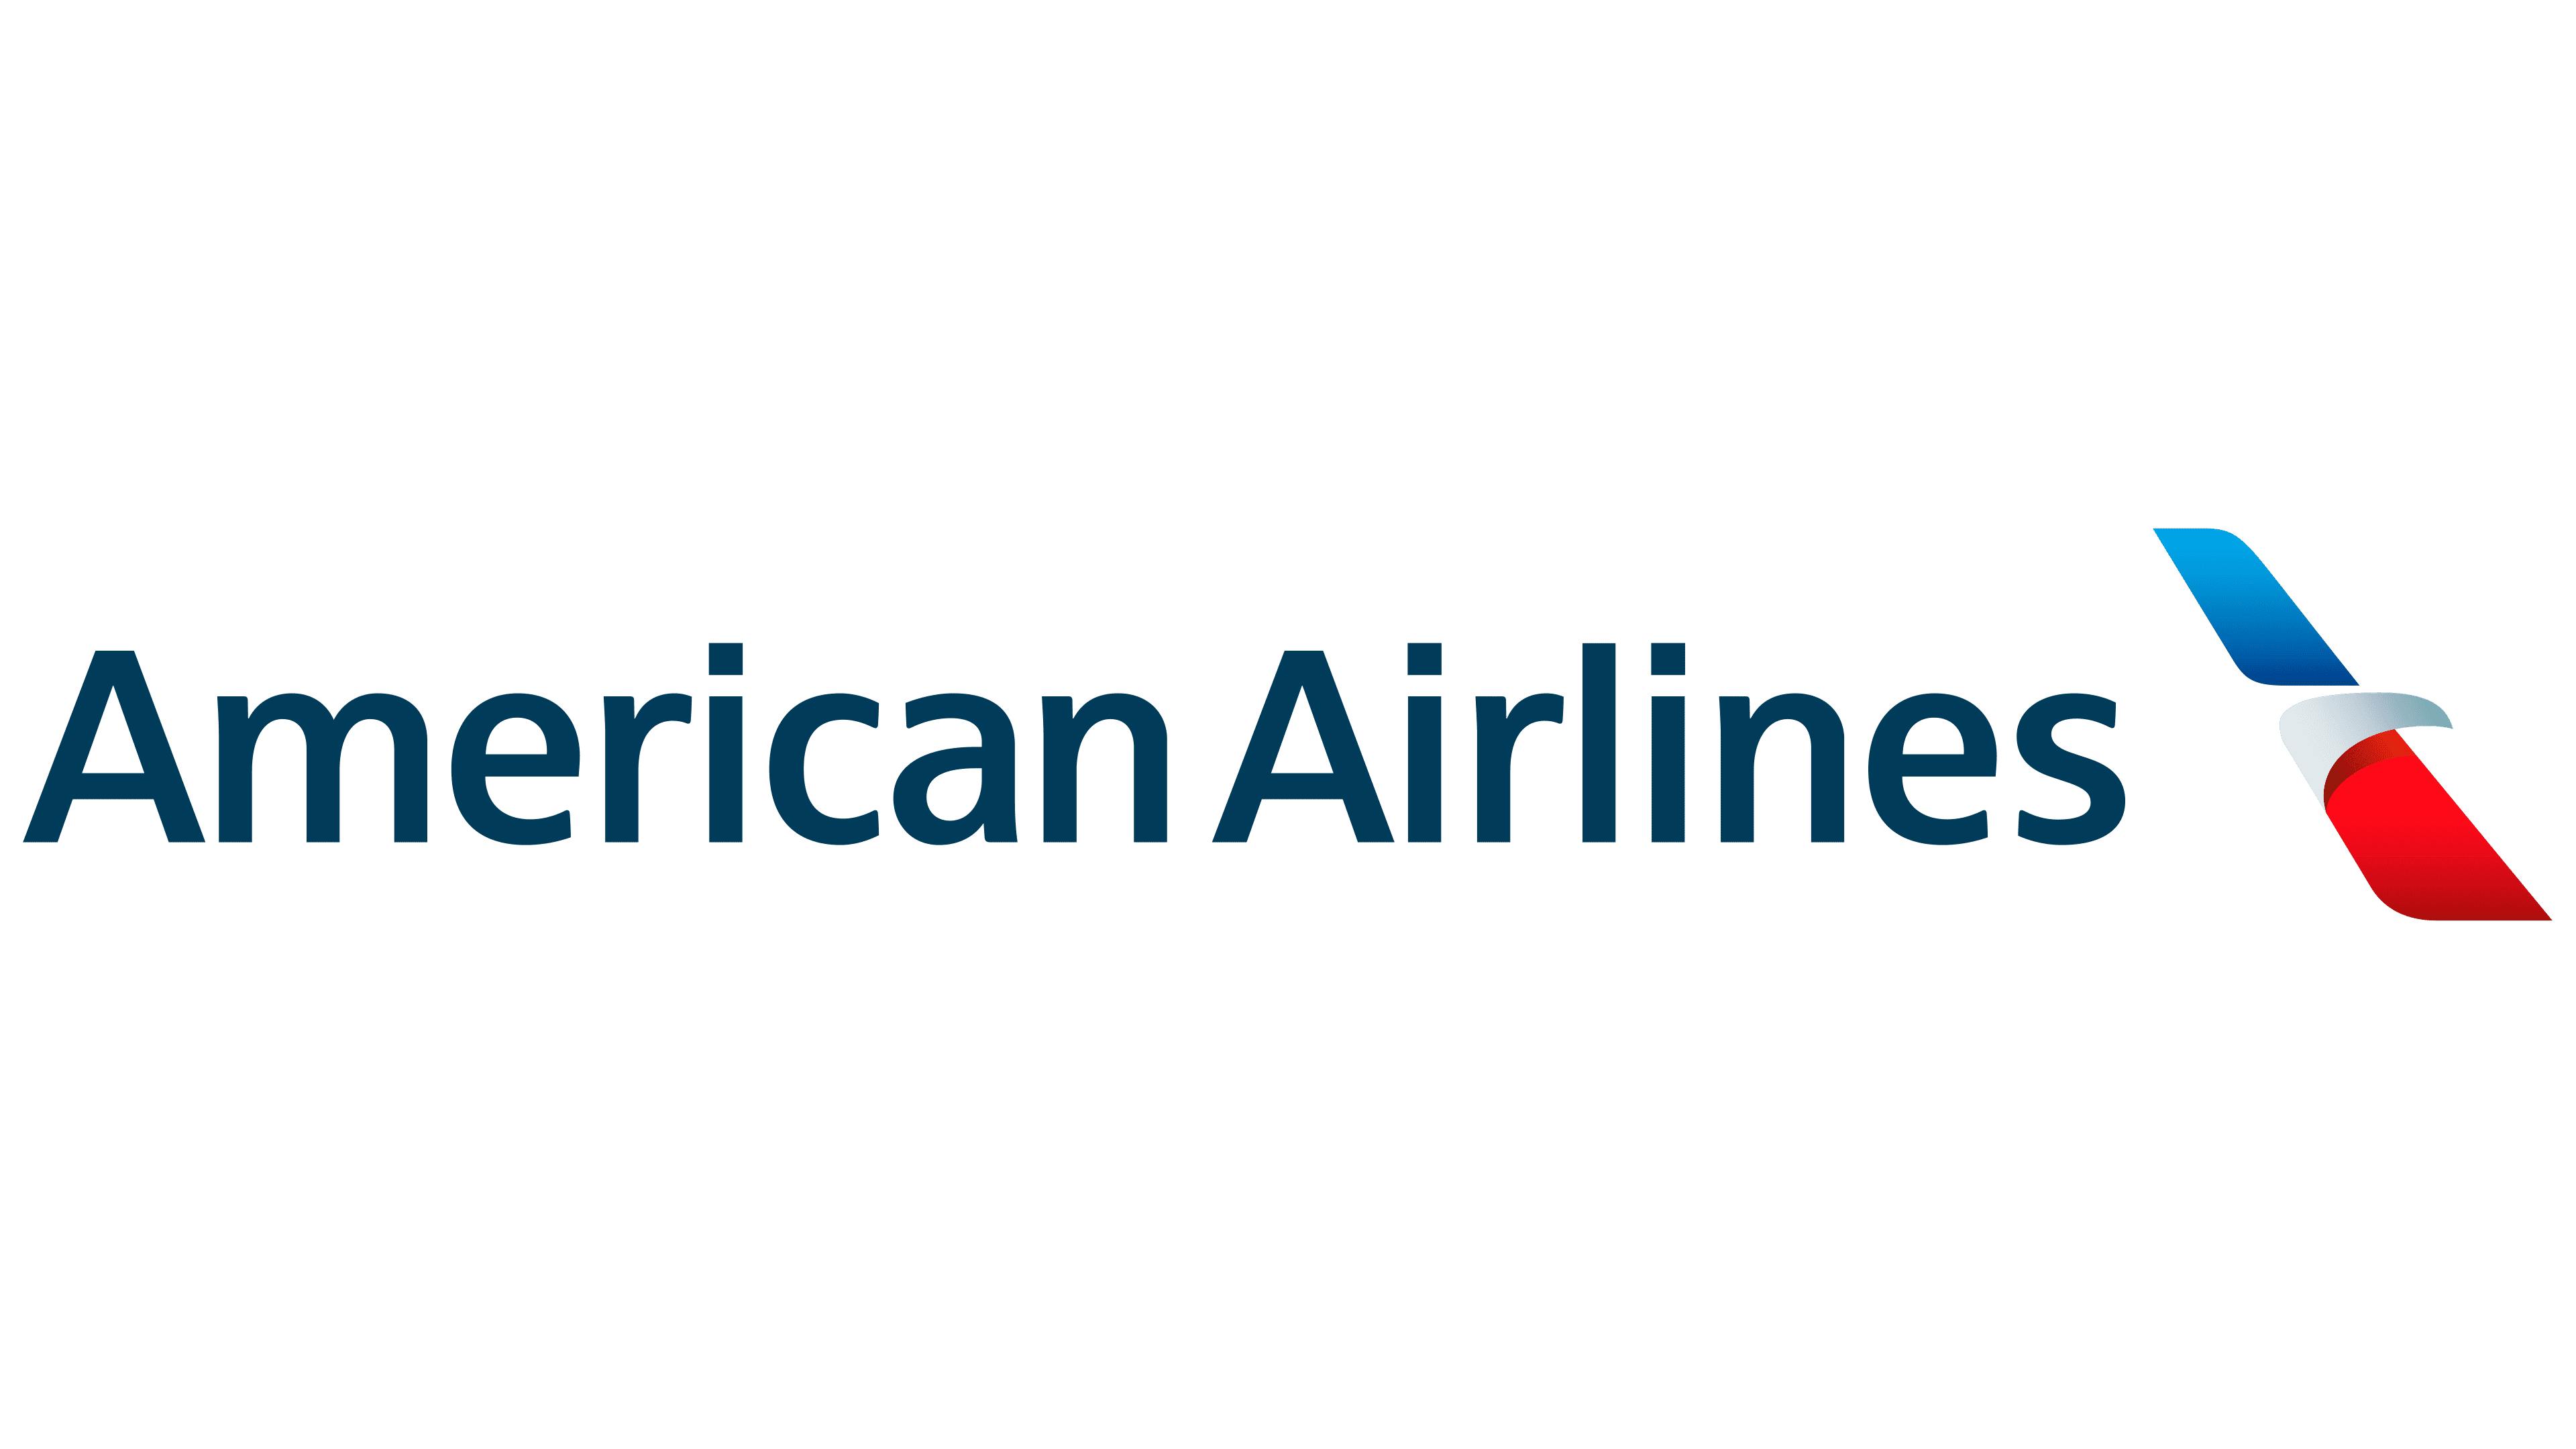 American airlines skyball